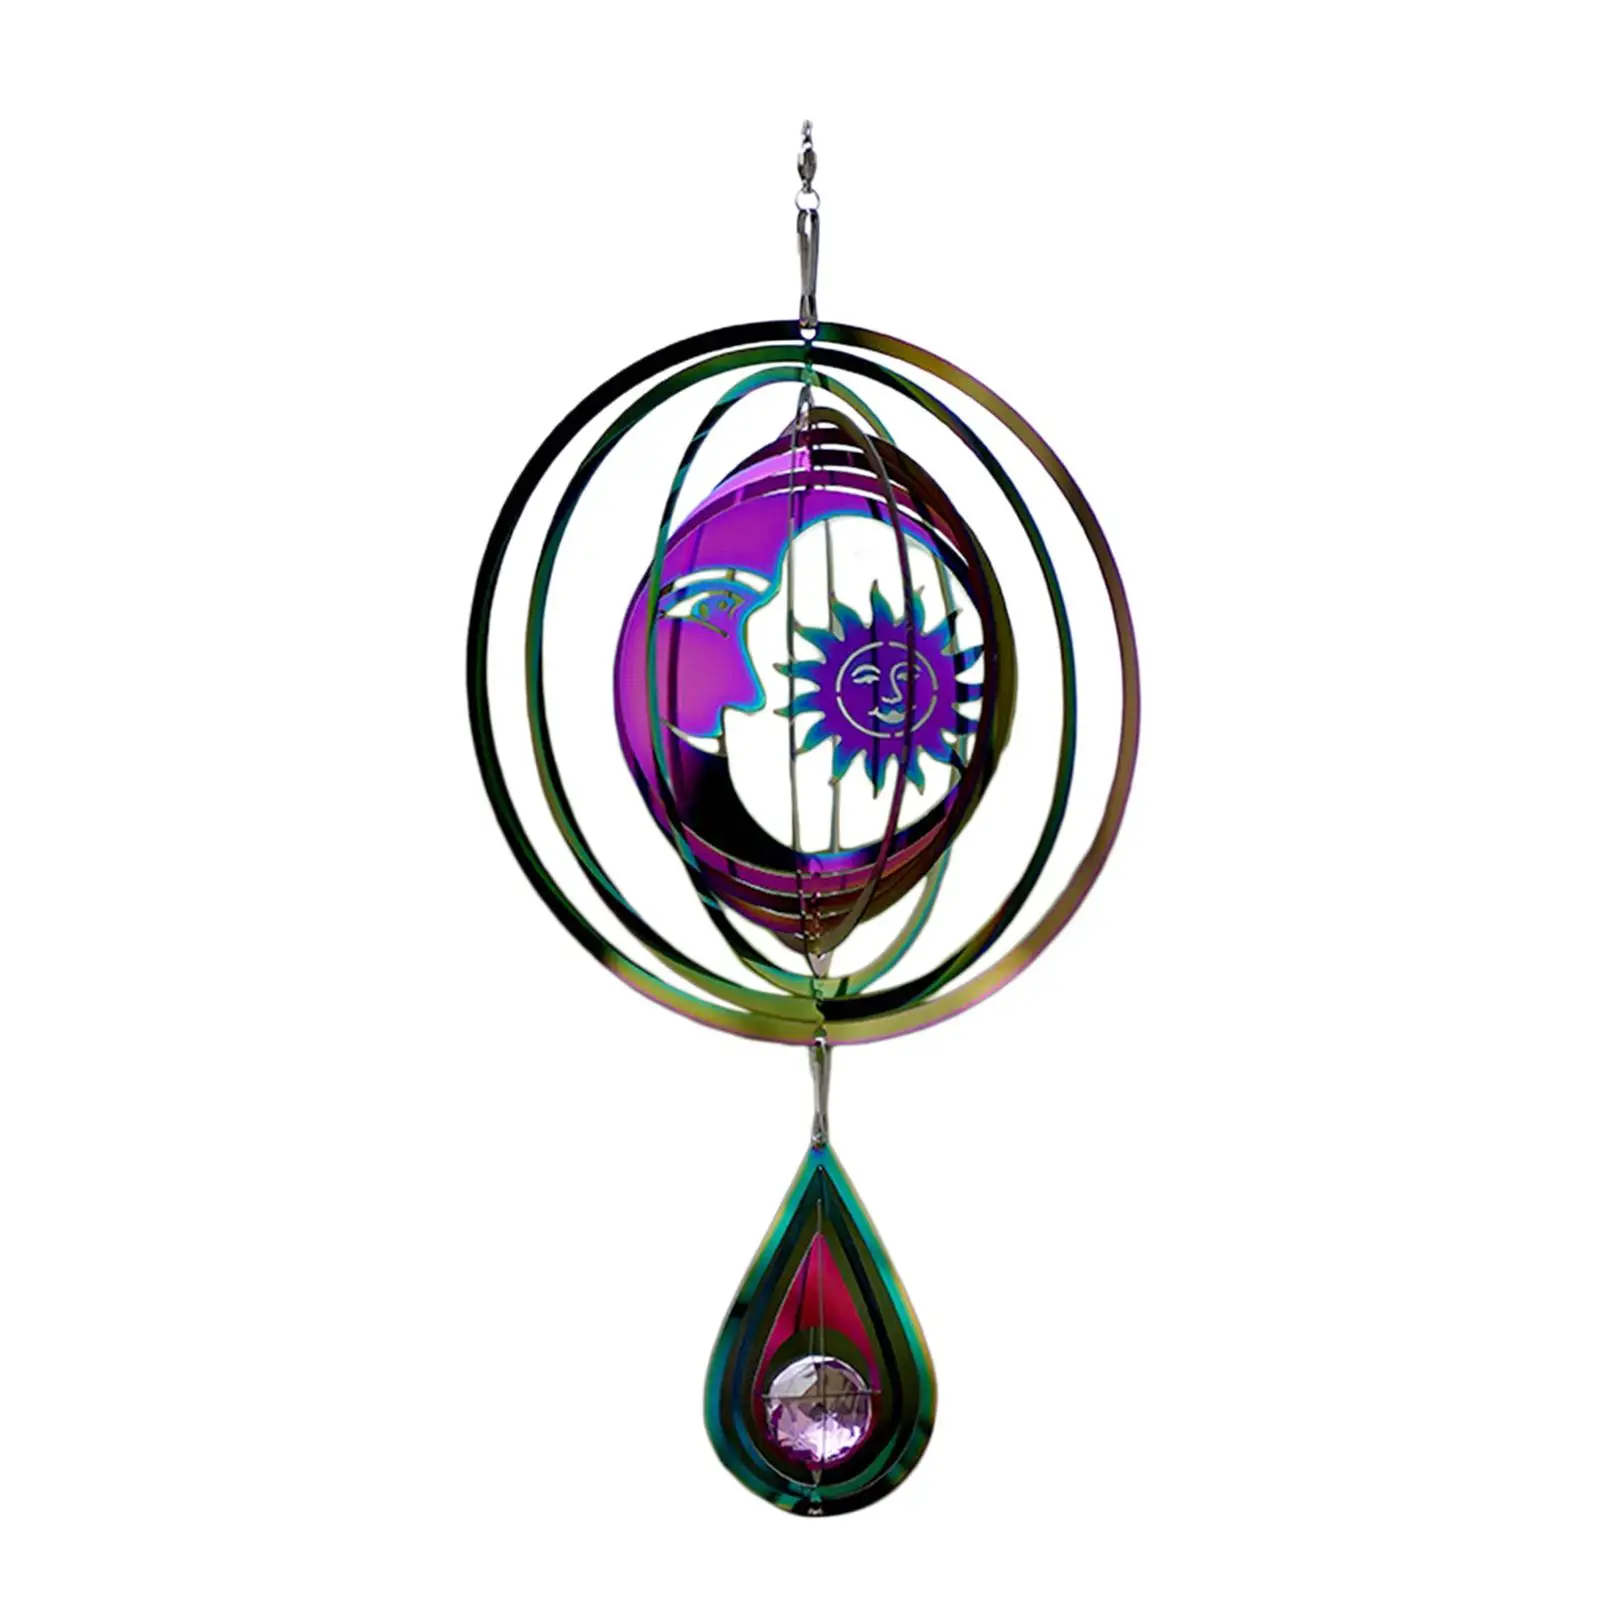 Metal Wind Spinner Garden Decorative Windchime for Patio Outside Living Room